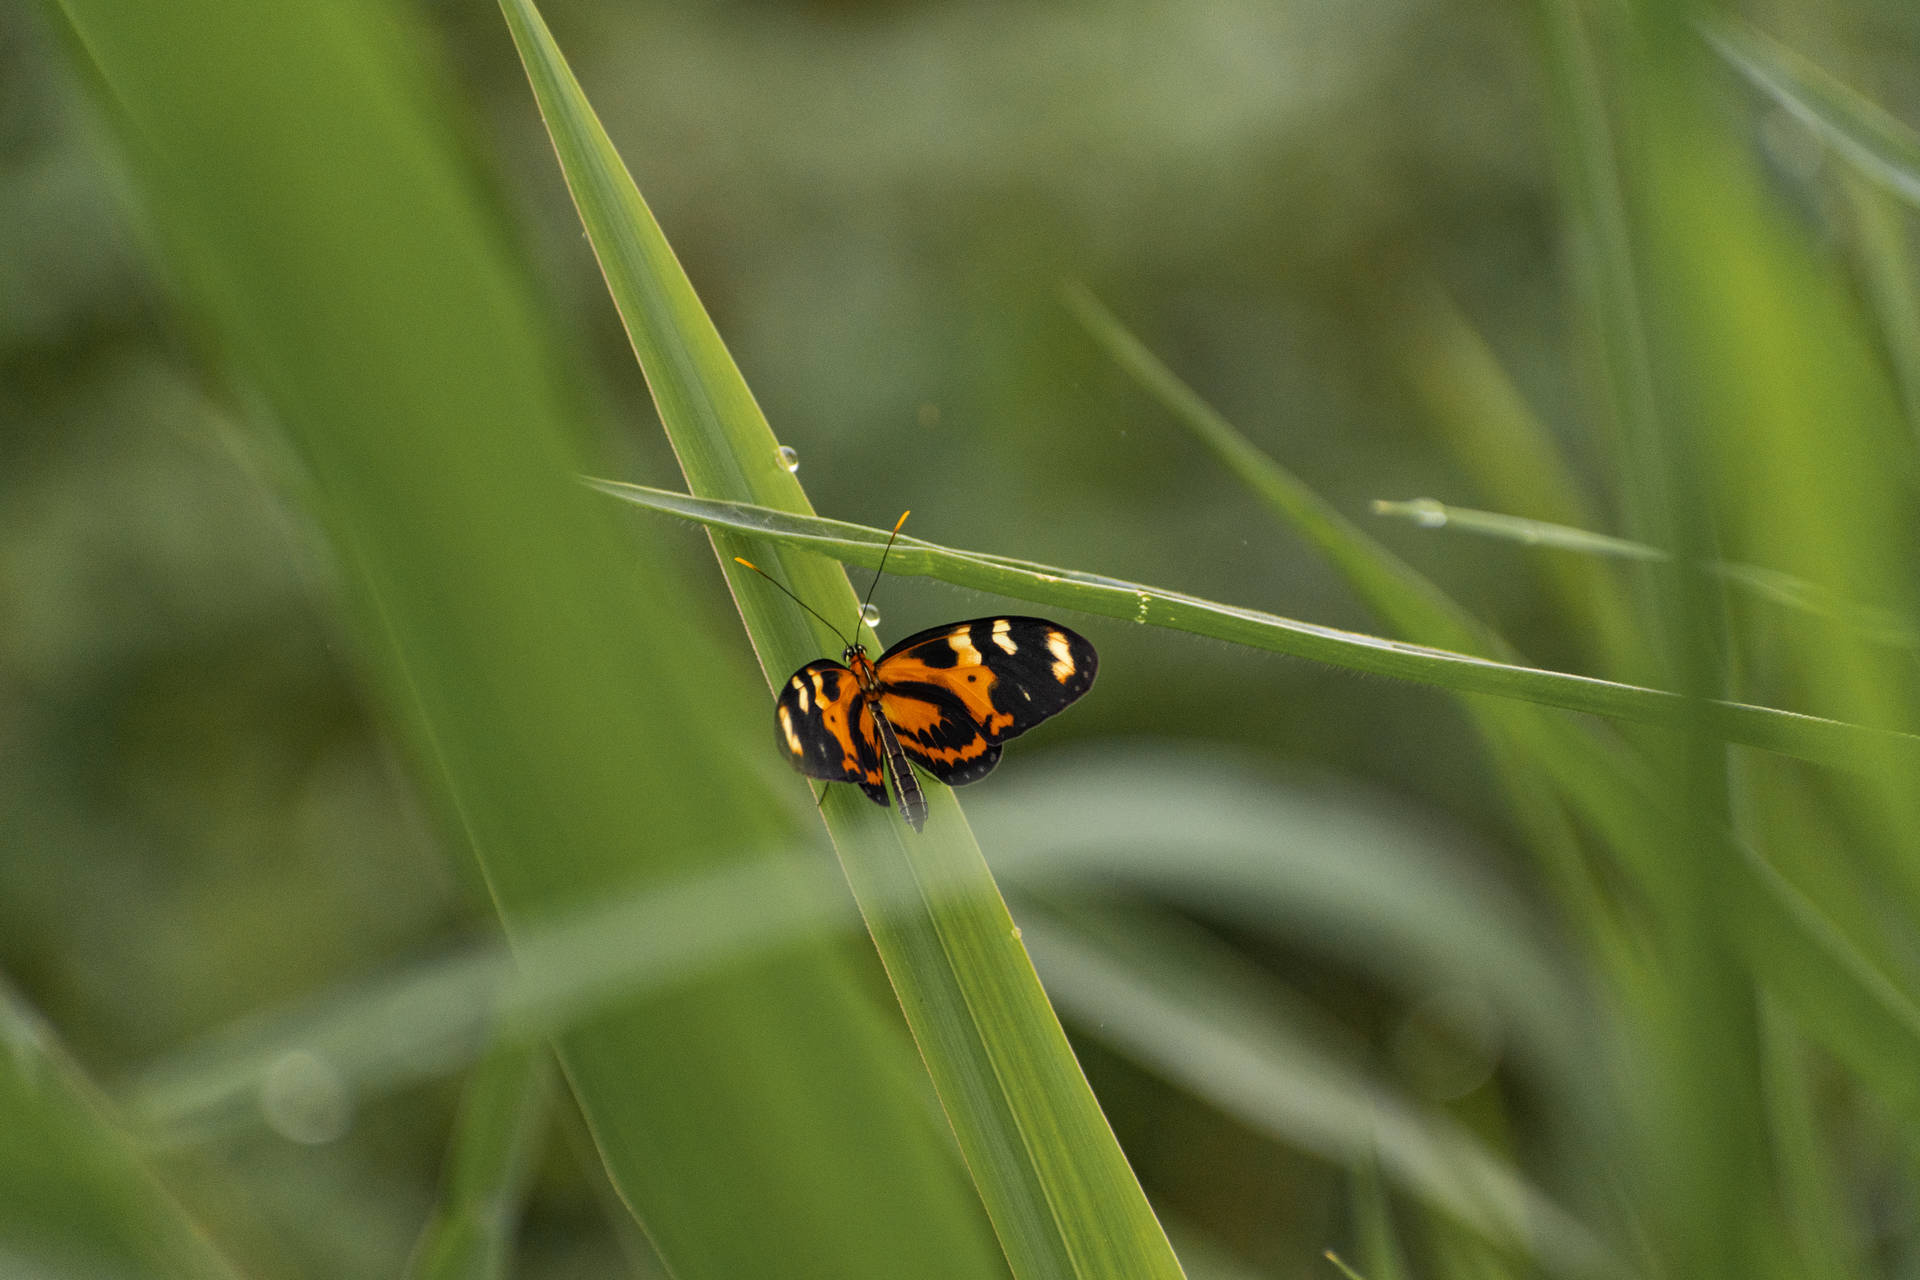 Cute Butterfly On Grass Background